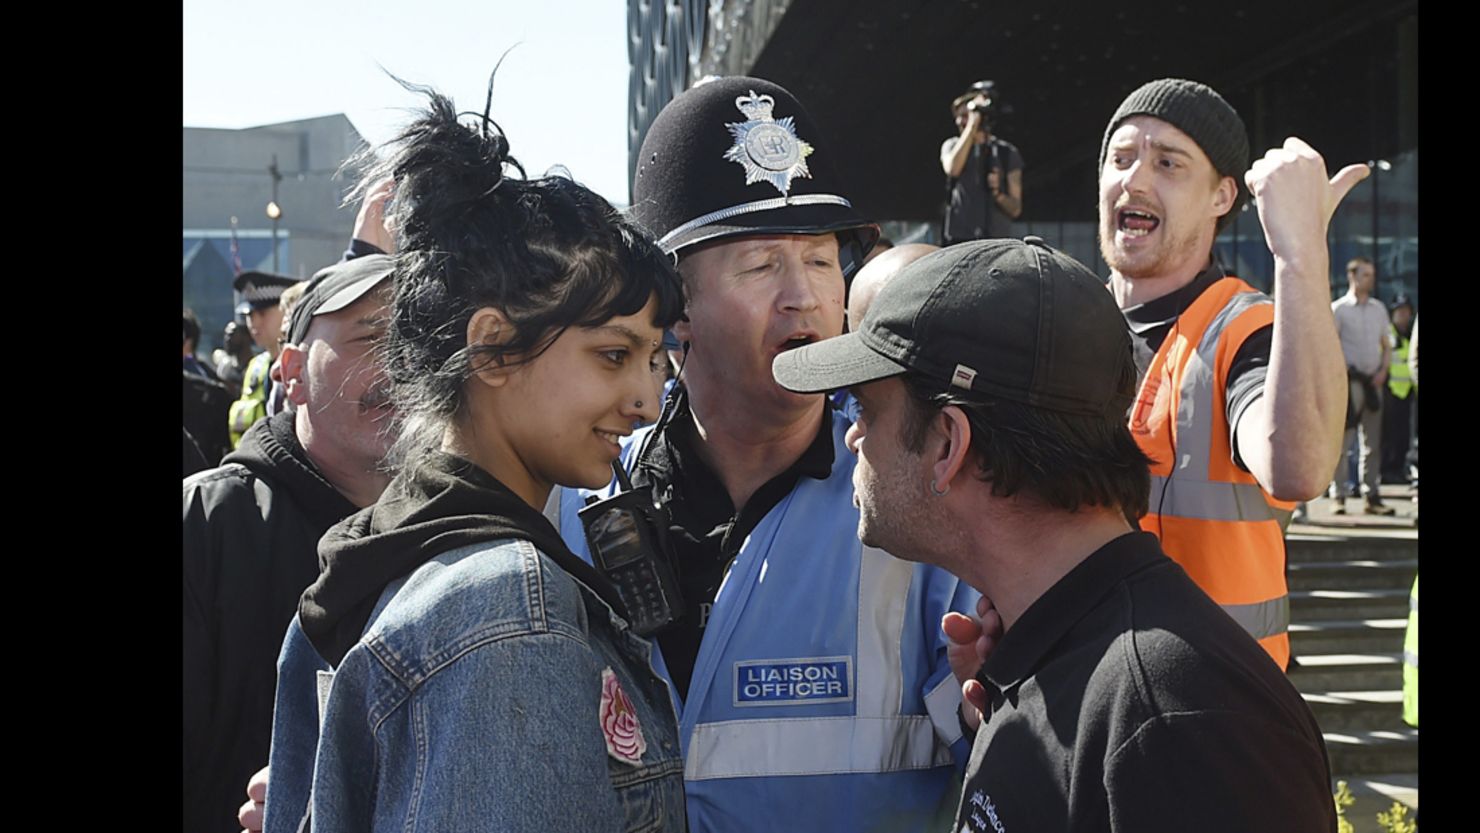 An English Defence League member, right, and a woman identified Saffiyah Khan, are pictured during an EFL rally in Birmingham, England, on Saturday.